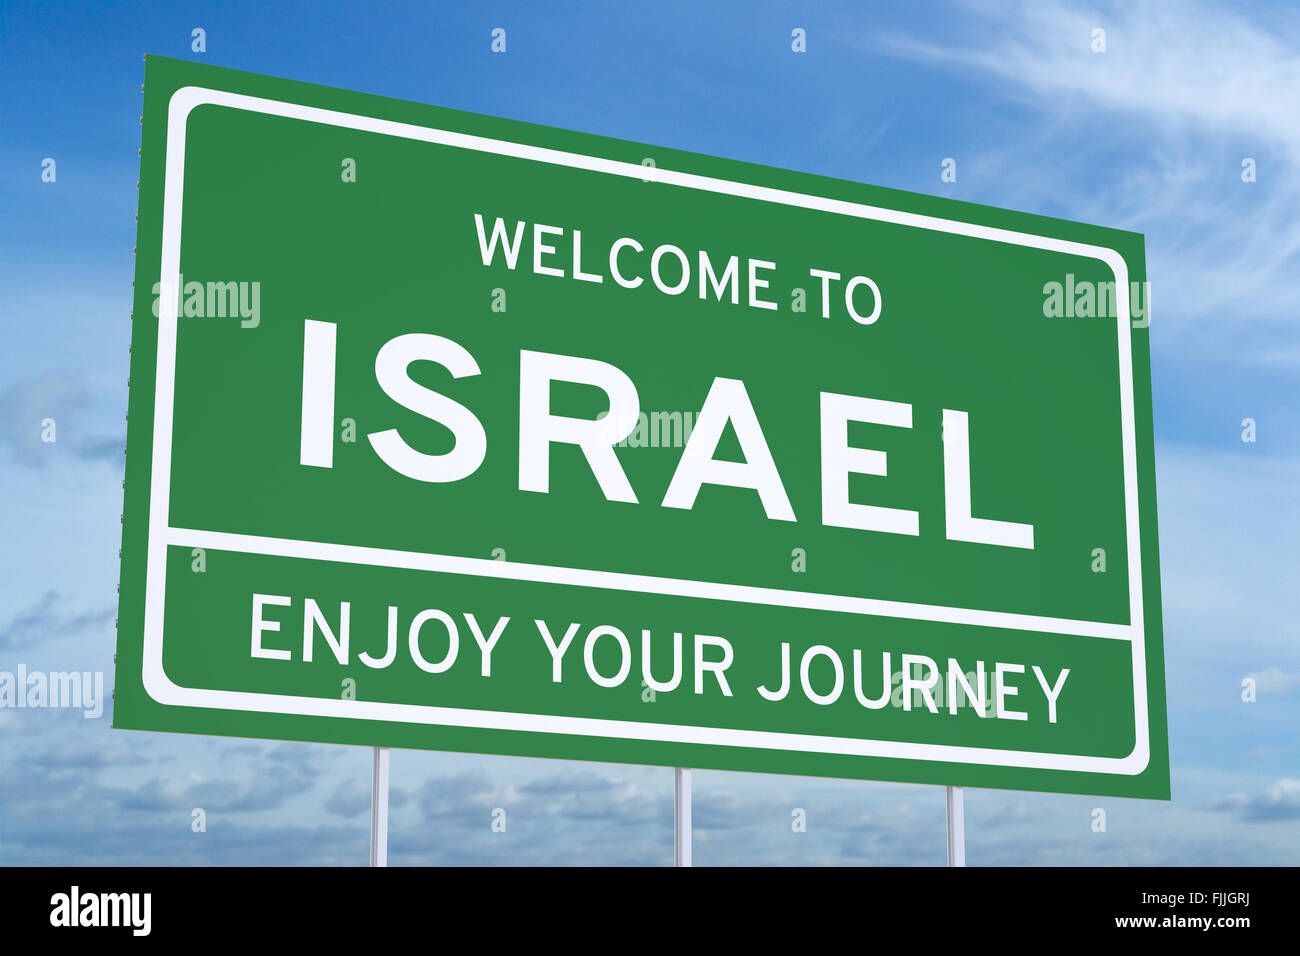 Welcome to Israel! 